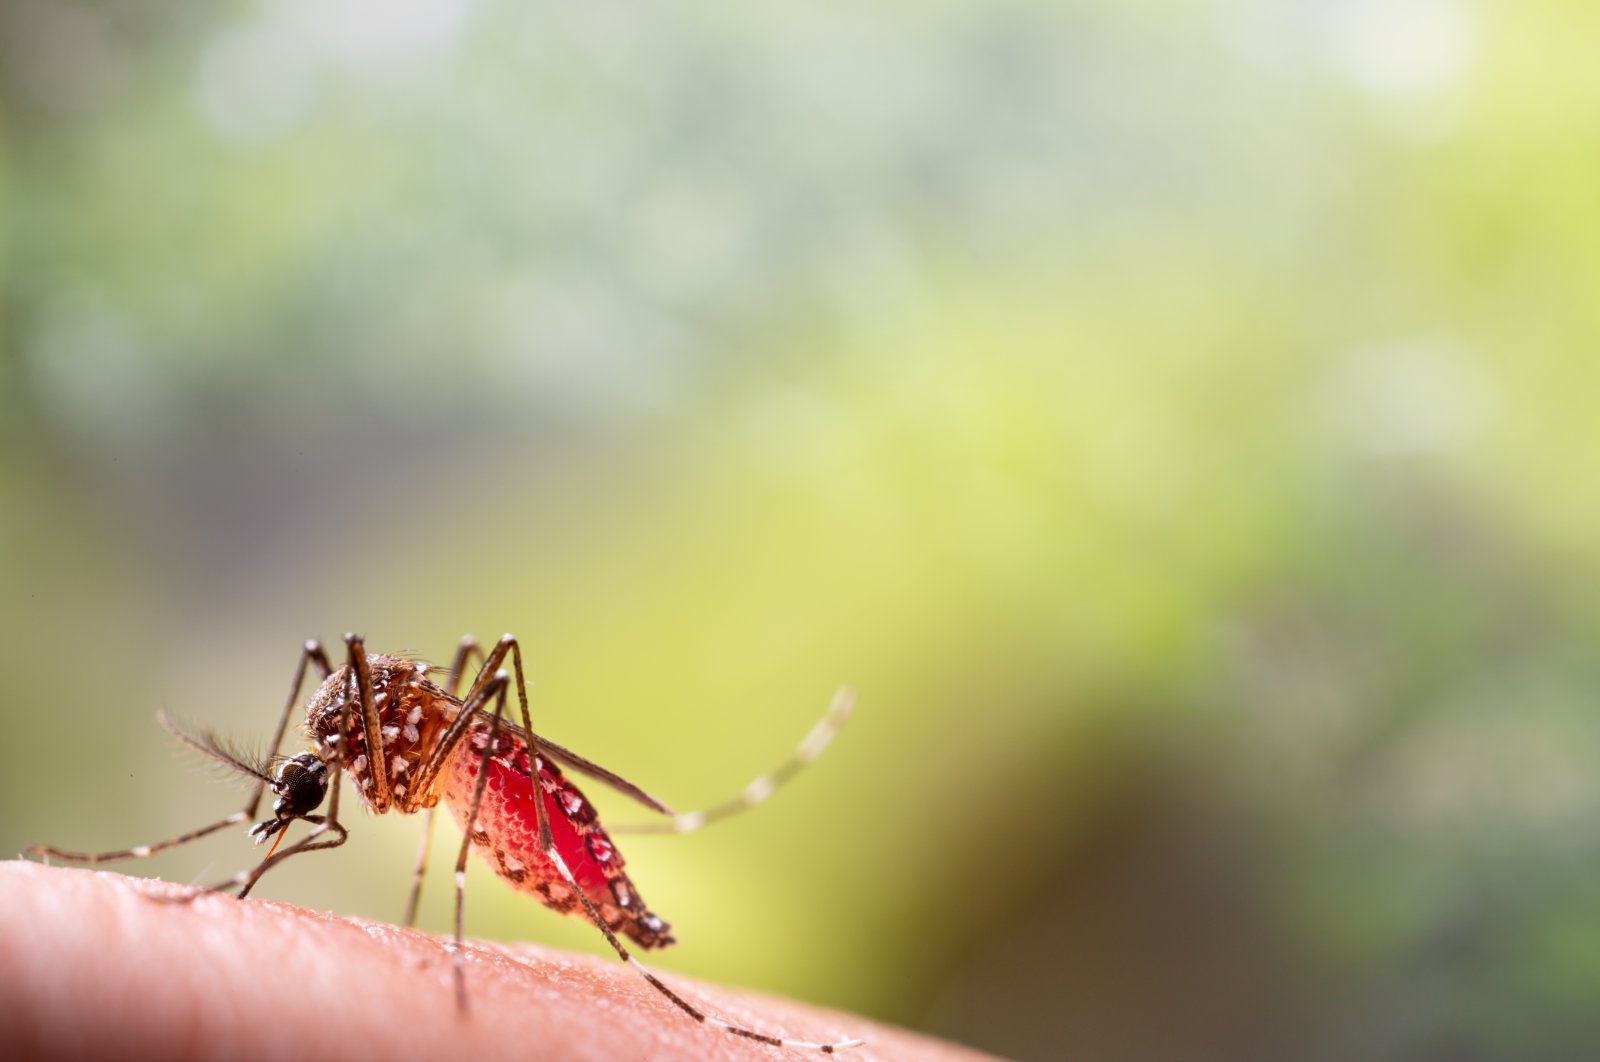 Travelers should prioritize health amid rising mosquito-borne infections, warns UKHSA. (Shutterstock Photo)